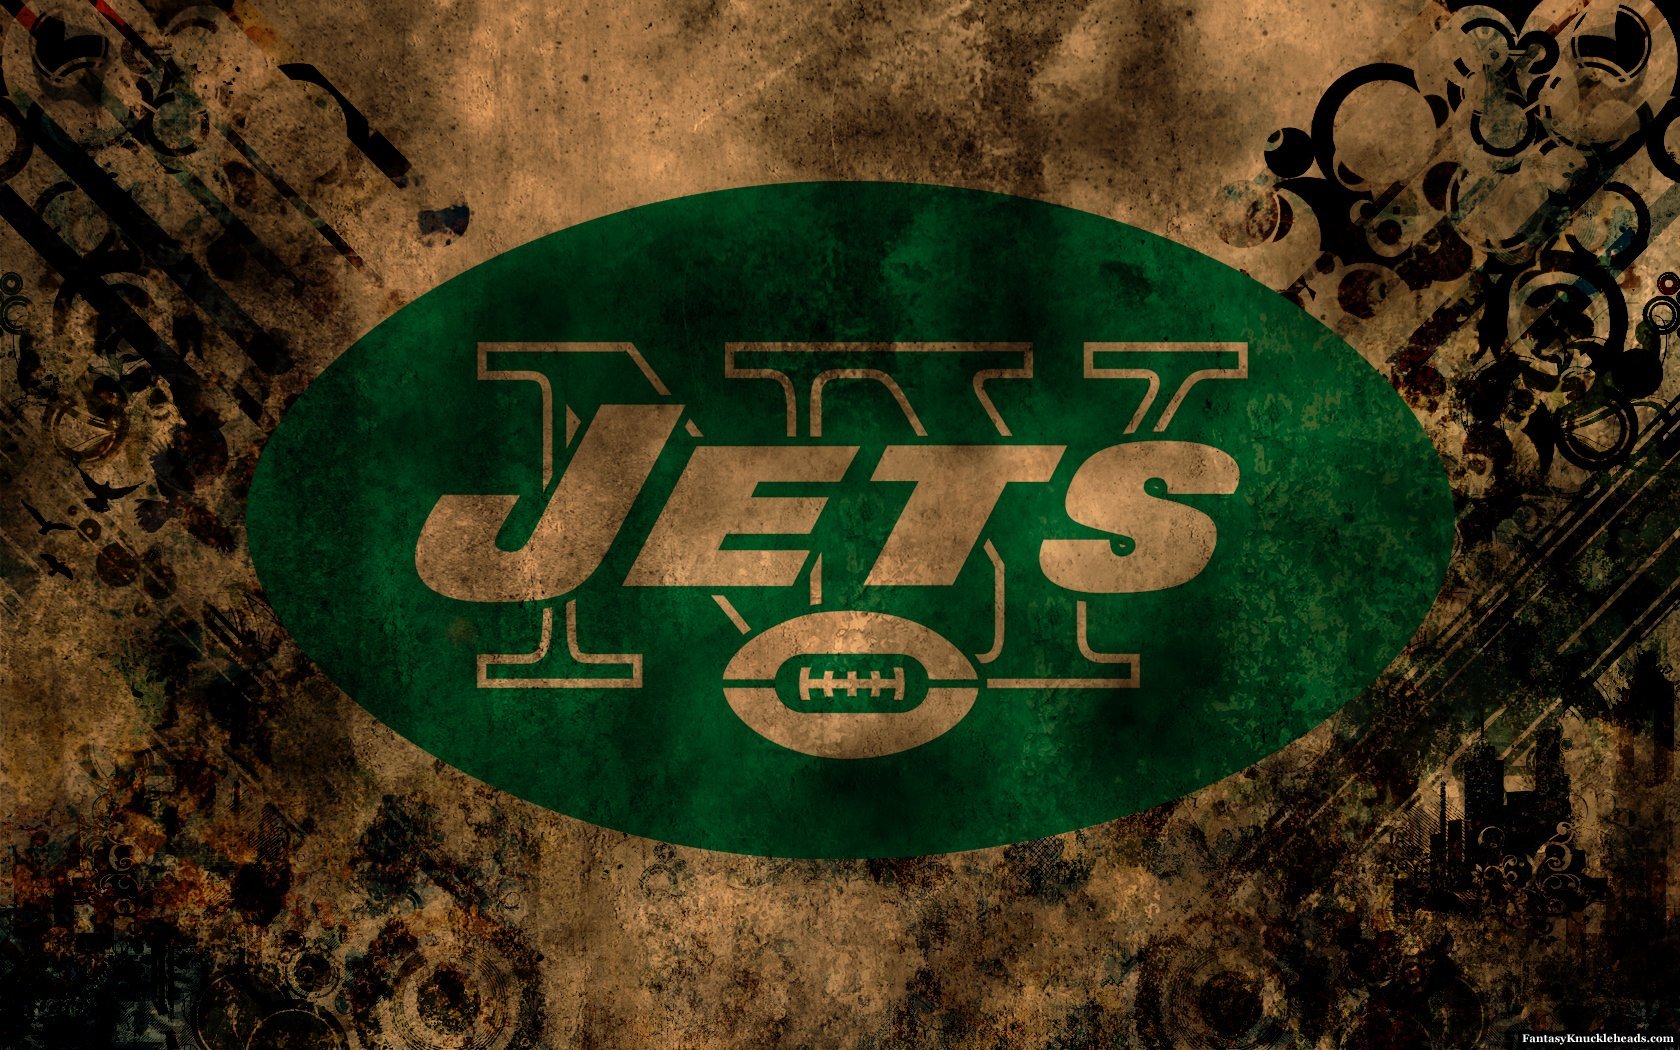 Nyjets Wallpapers